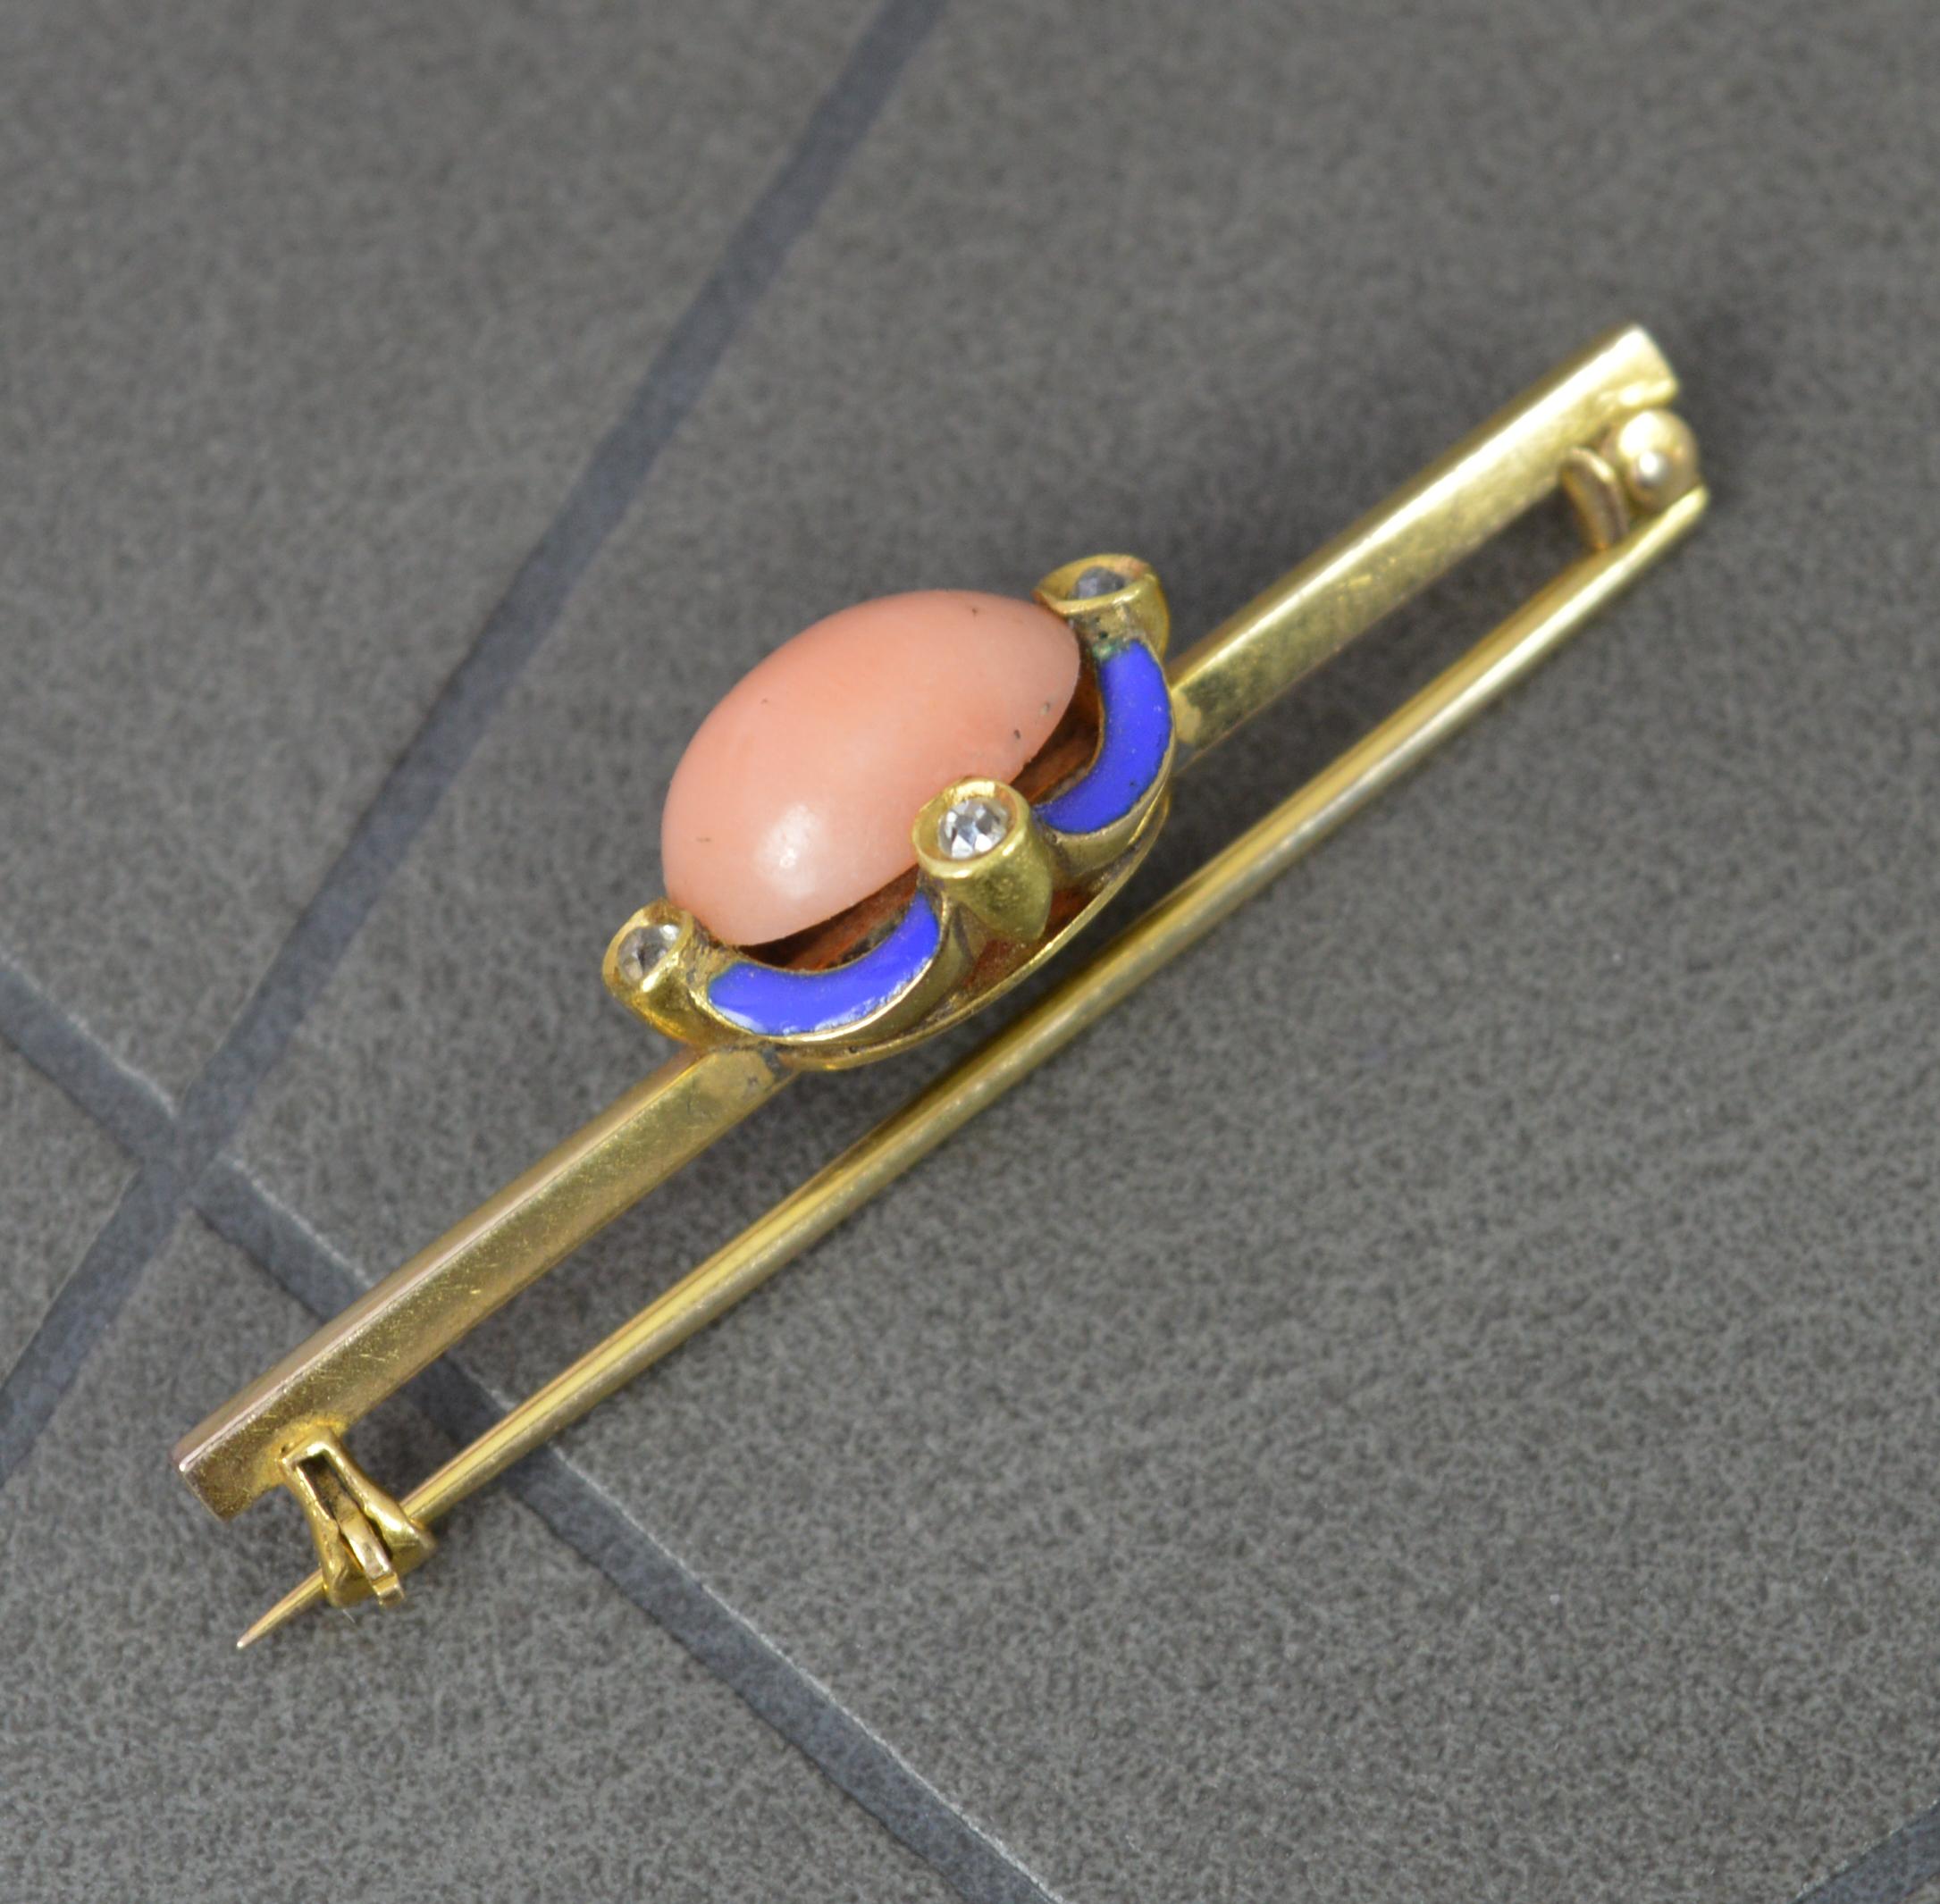 A beautiful true antique brooch circa 1880.
Solid 15 carat yellow gold example.
A brooch with oval shaped coral to centre with blue enamel and four old cut diamond border.
3.4 grams, 3.8cm long. 8mm x 10mm coral.

Condition ; Excellent. Crisp design